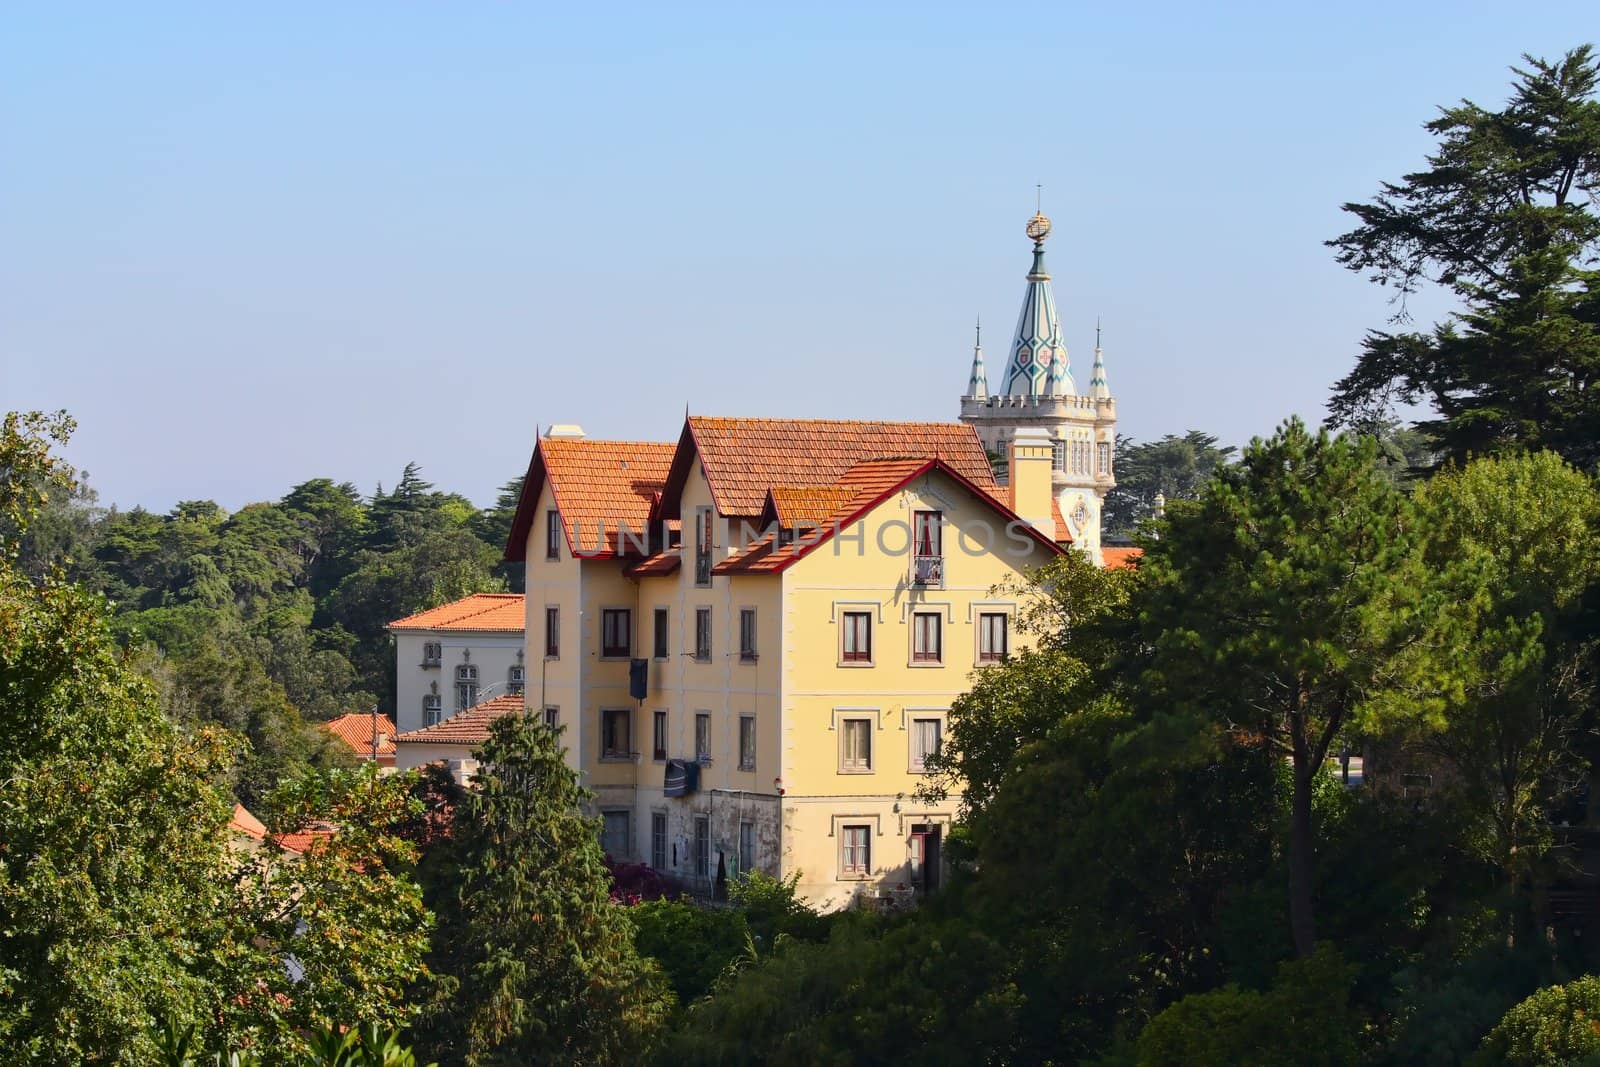  baroque tower castle of sintra's city hall by kalnenko